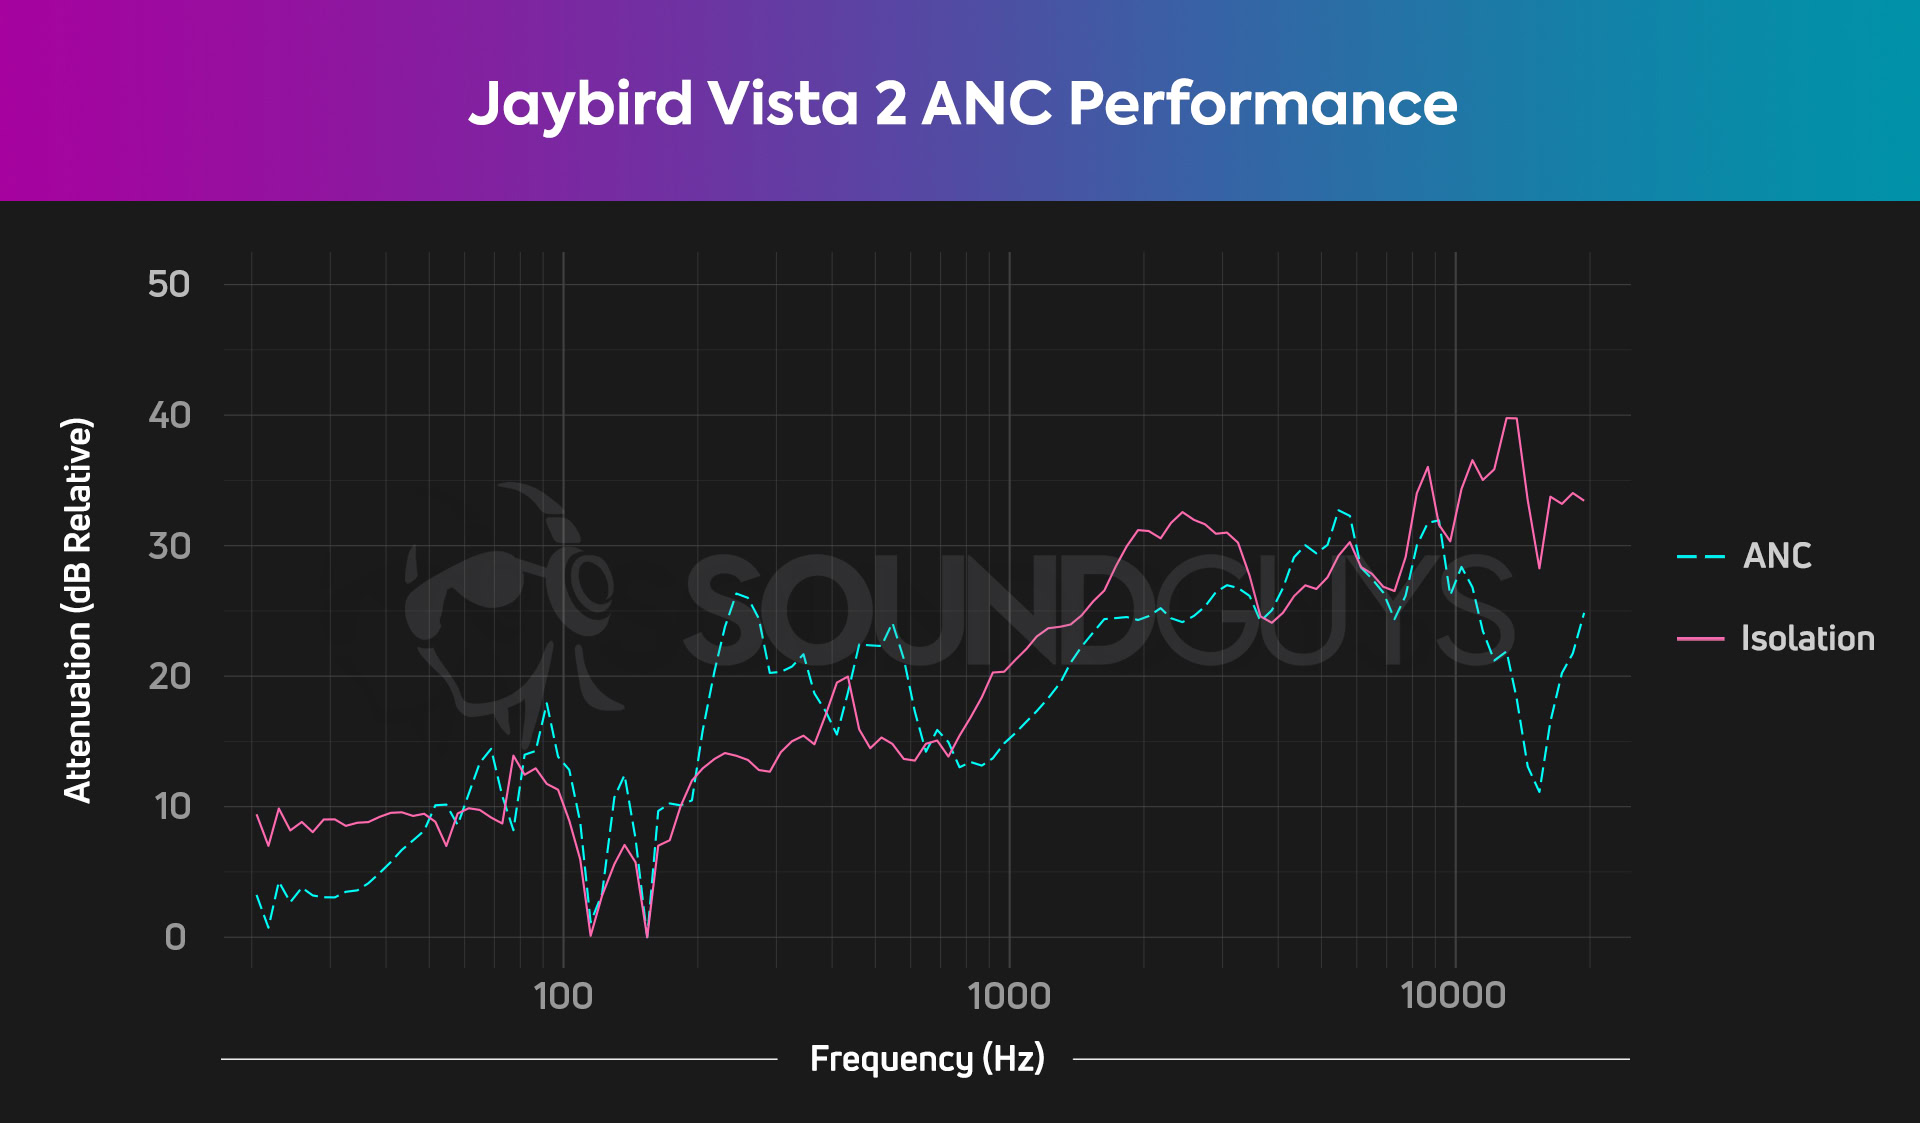 Chart showing frequency reduction from isolation and ANC on the Jaybird Vista 2